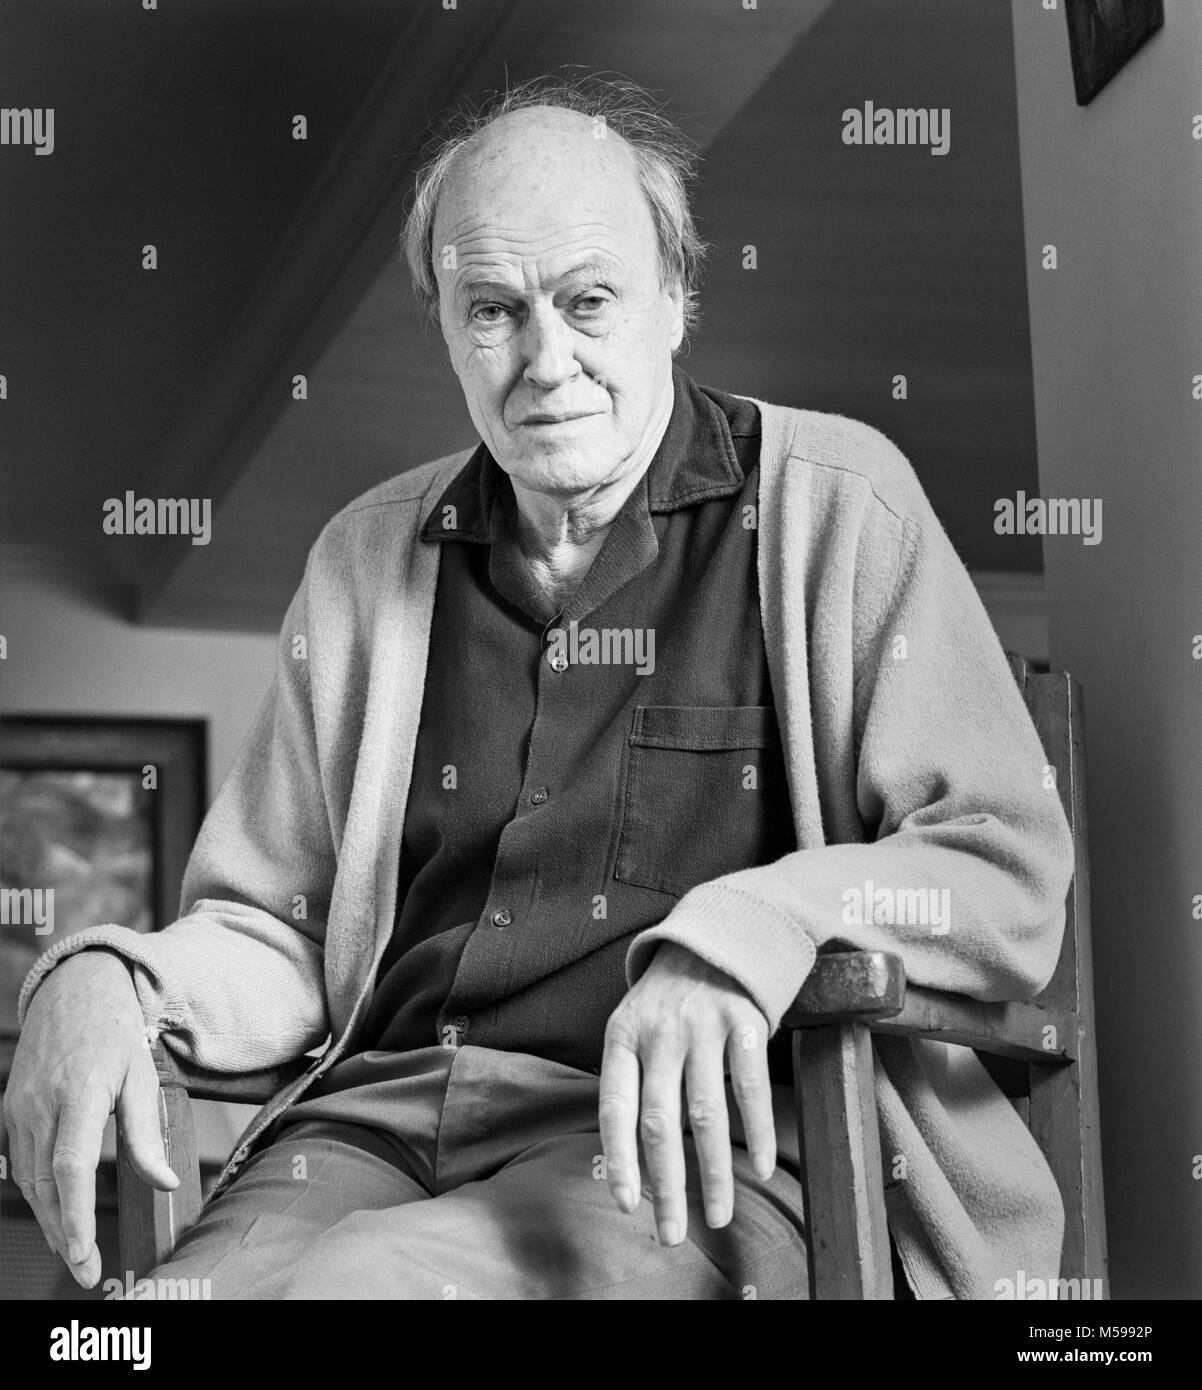 Roald Dahl, 13 September 1916 – 23 November 1990, author of childrens. books and stories, archival photograph made on 18 September 1989 in his home, England, UK Stock Photo